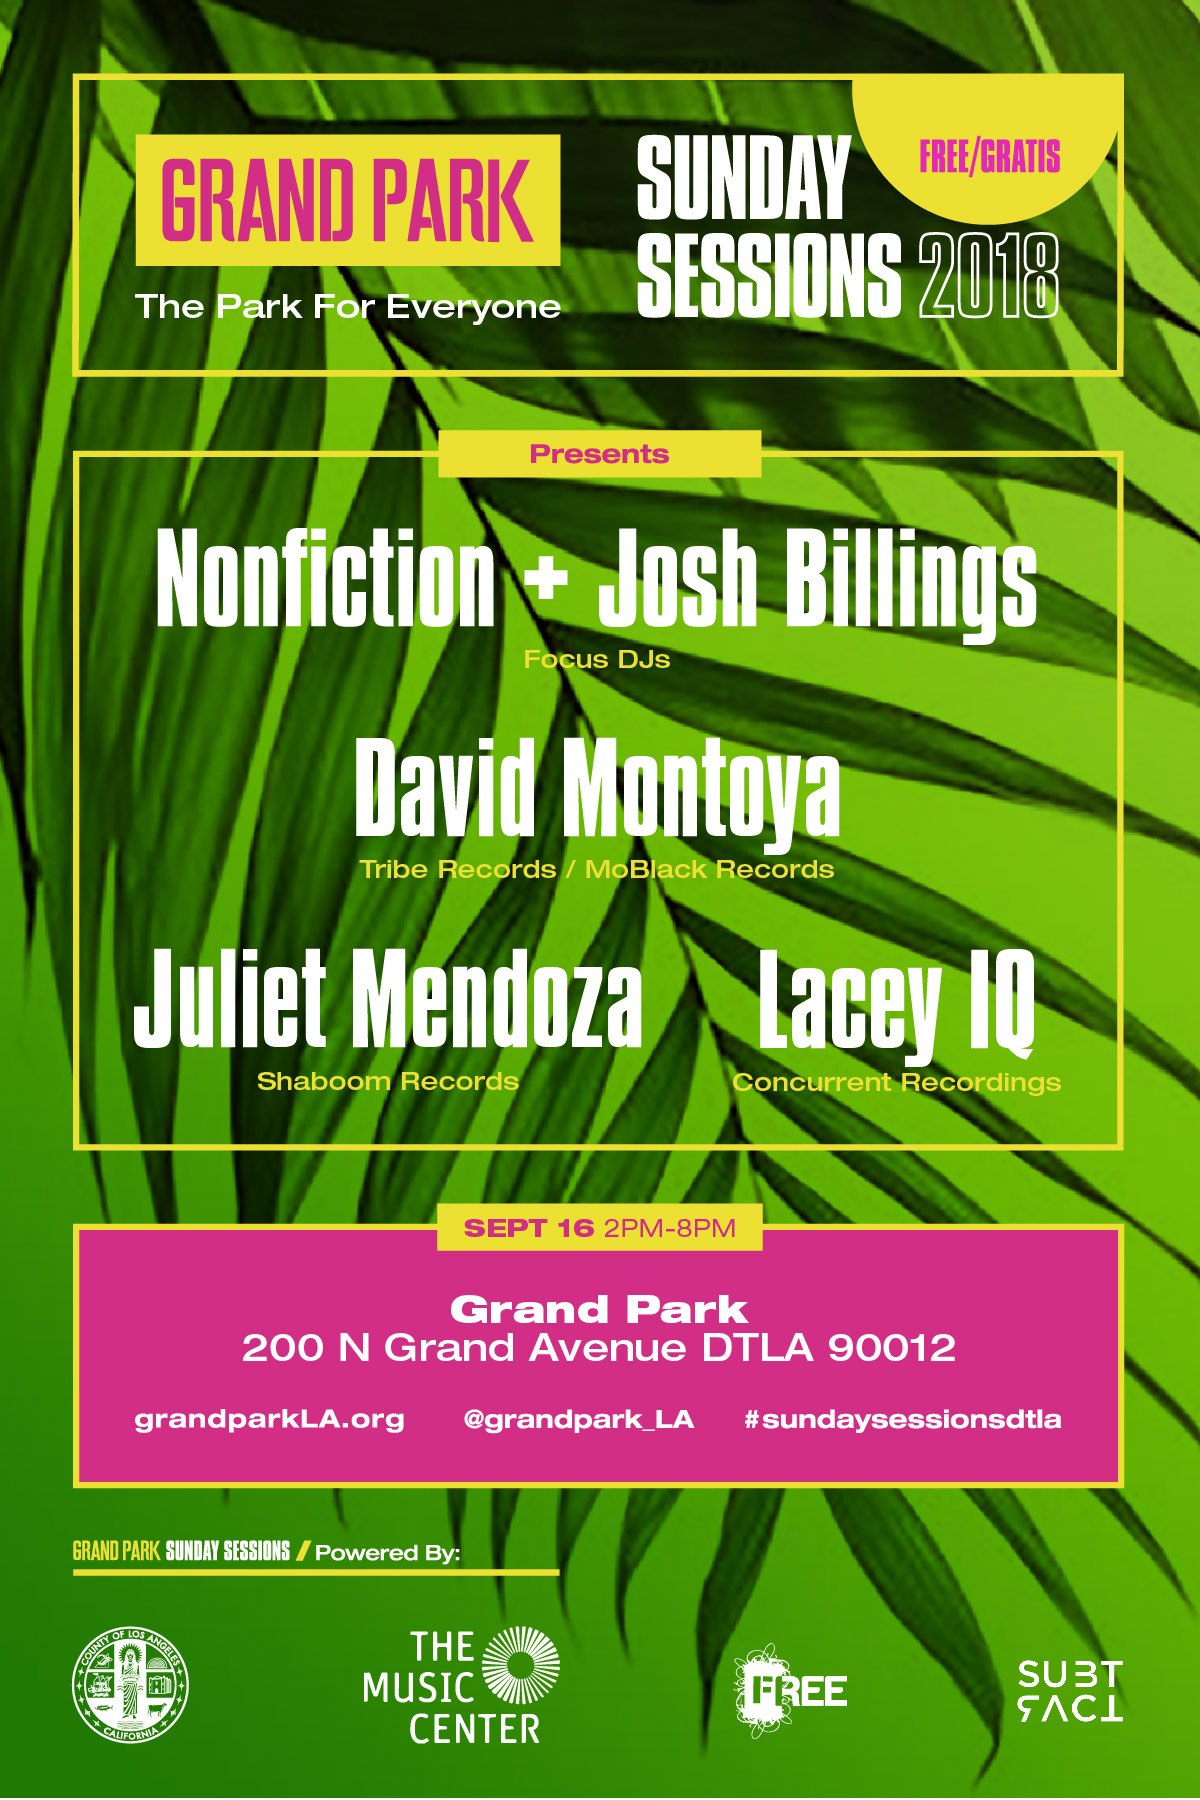 GRAND PARK SUNDAY SESSIONS PRESENTS FOCUS DJs (Nonfiction & Josh Billings), DAVID MONTOYA, JULIET MENDOZA, and LACEY IQ @ Grand Park's Performance Lawn (between Grand and Hill)  | Los Angeles | California | United States